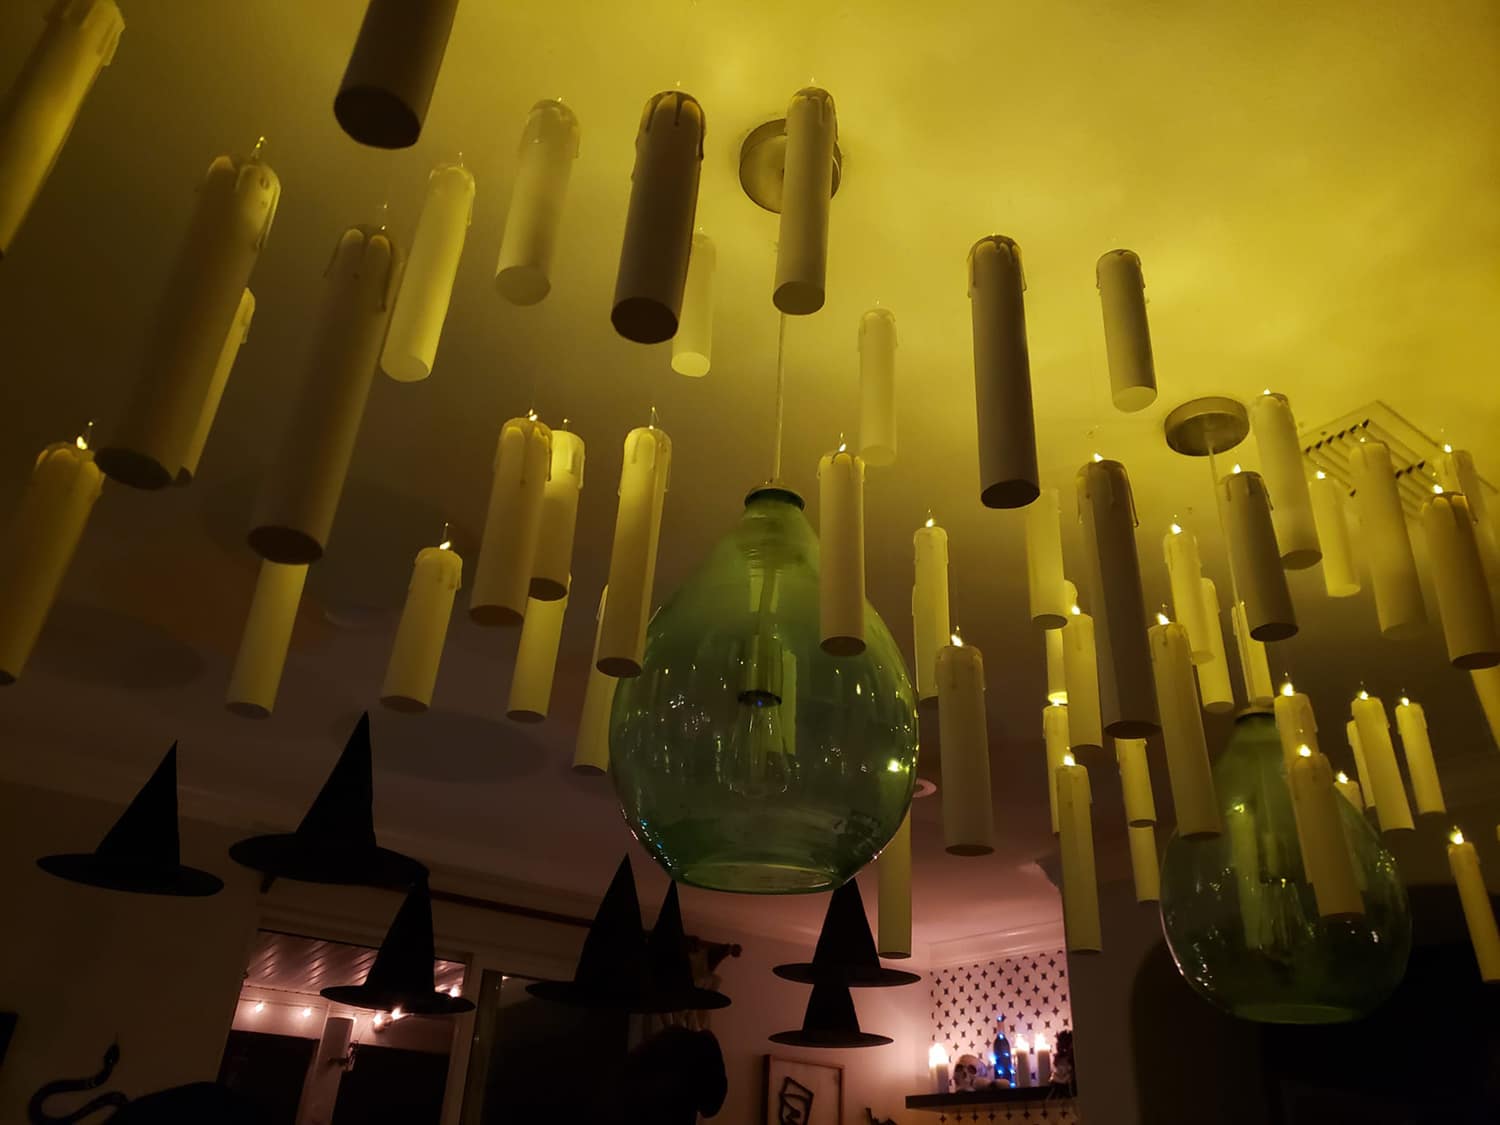 Looking up at a bunch of hanging Harry Potter floating candles on the ceiling